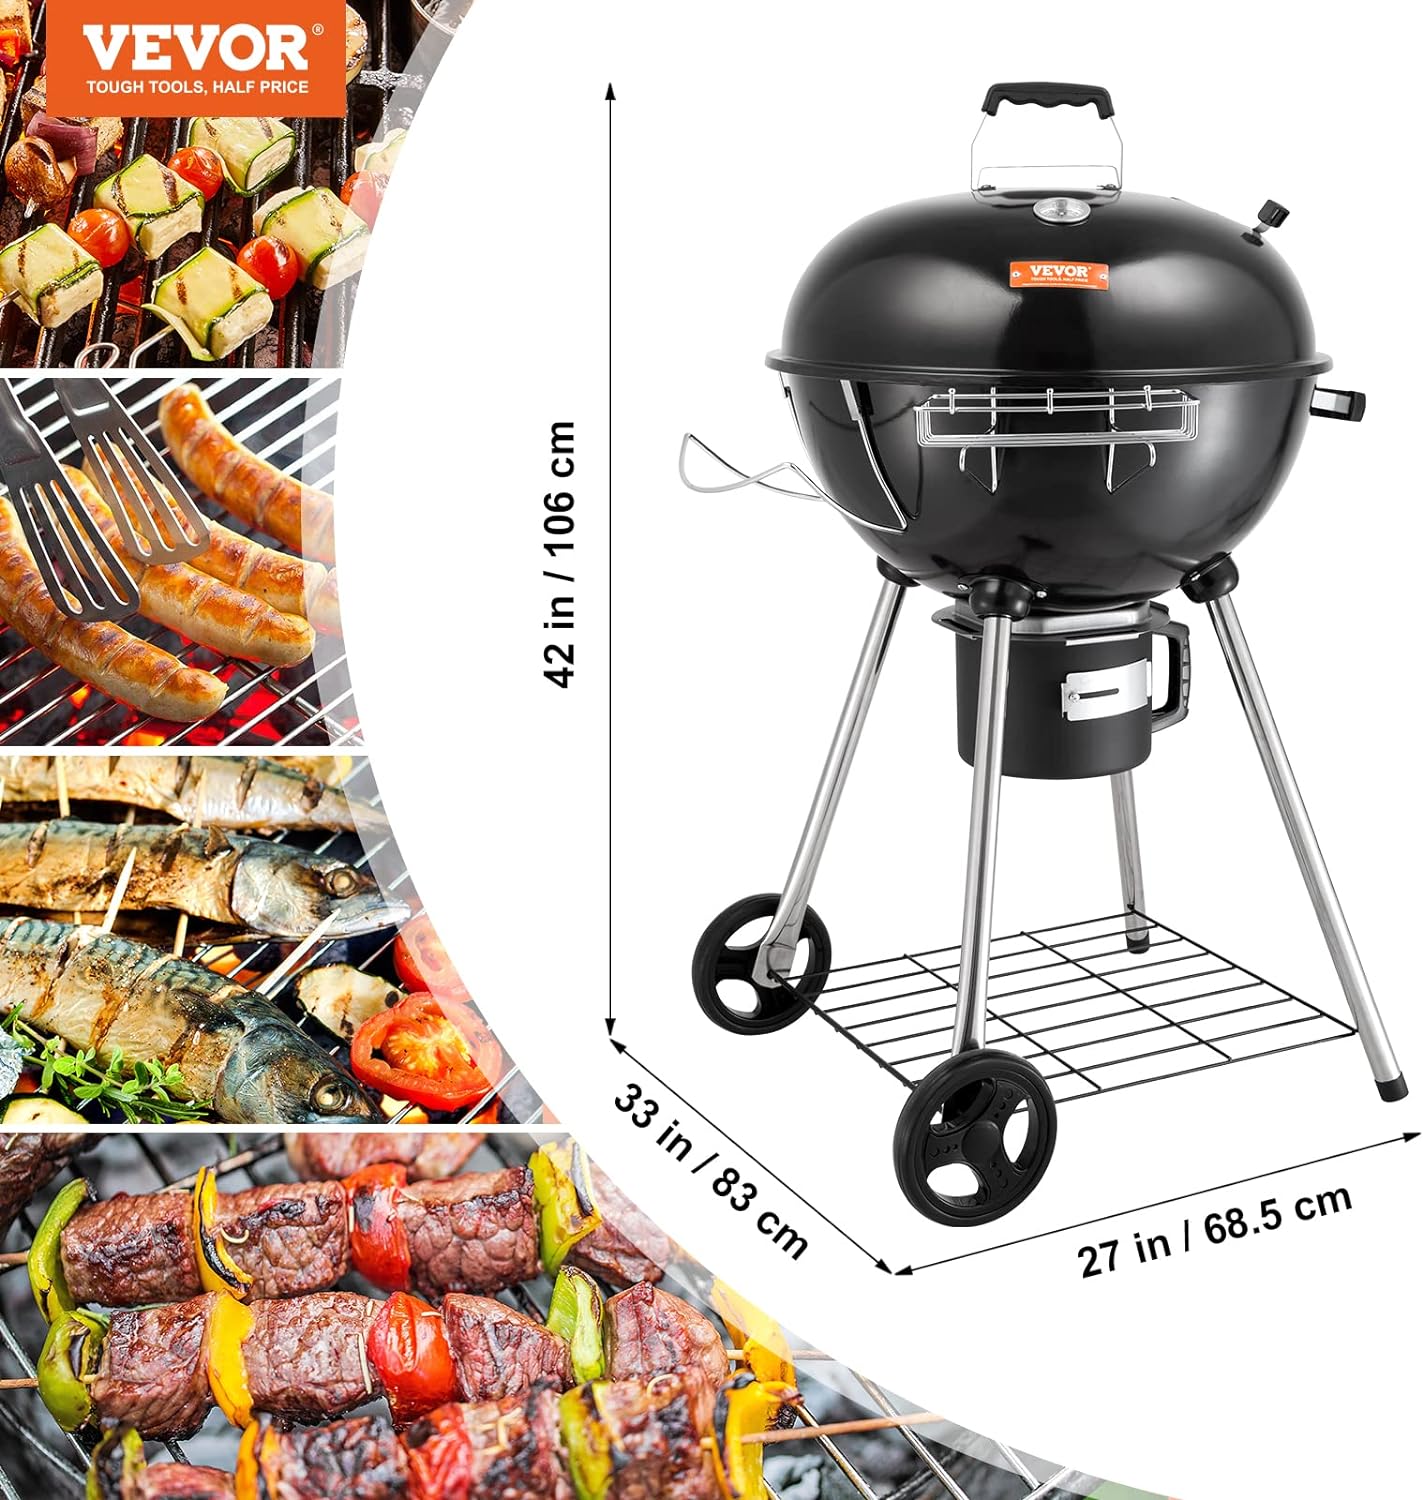 VEVOR 22 inch Charcoal Grill, Portable Charcoal Grill with Wheels for Outdoor, Porcelain-Enameled Lid and Ash Catcher  Thermometer, Round Barbecue Kettle Grill Bowl Wheels for Small Patio Backyard